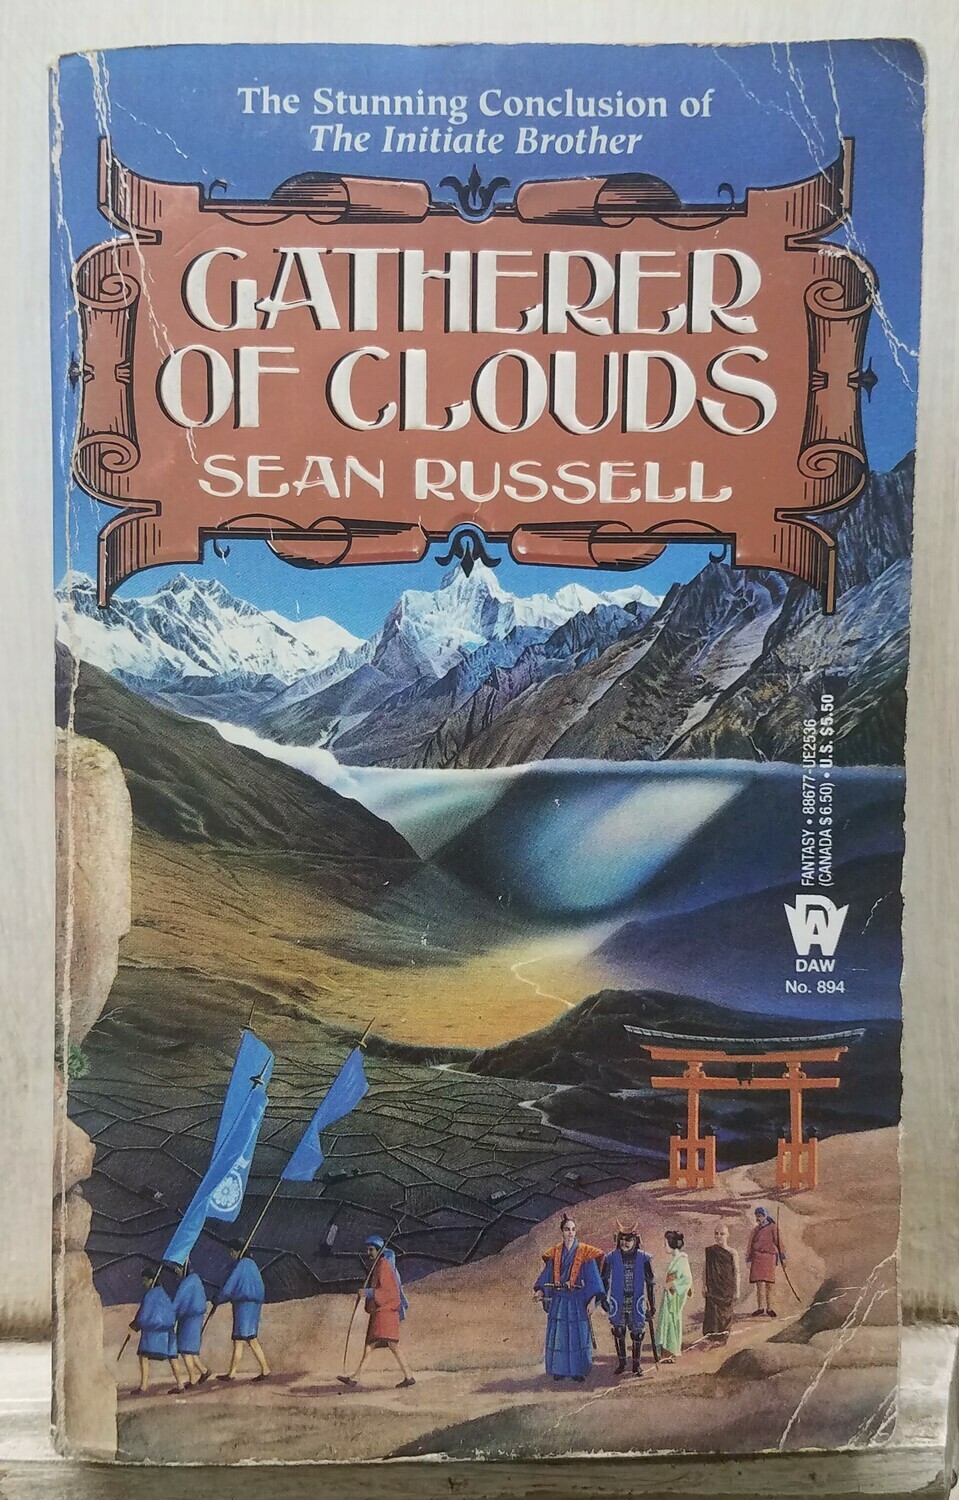 Gatherer of Clouds by Sean Russell